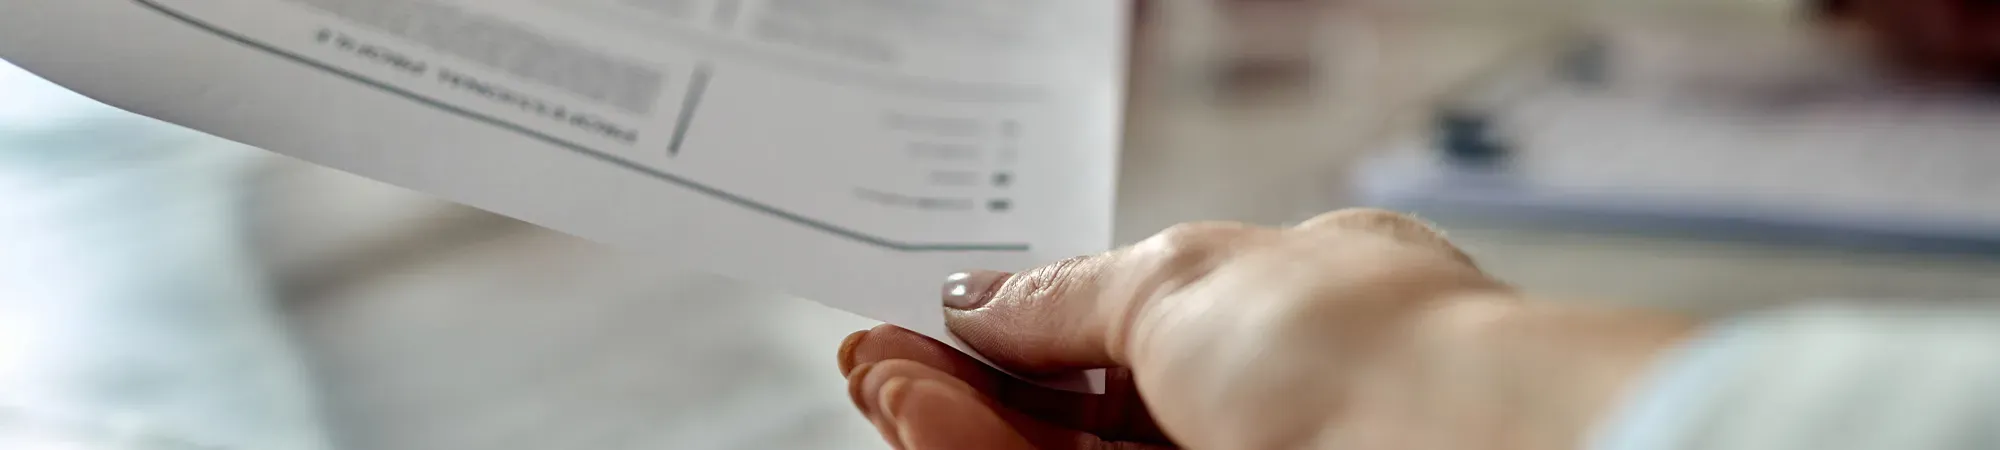 Generic image of a person looking at printed documents